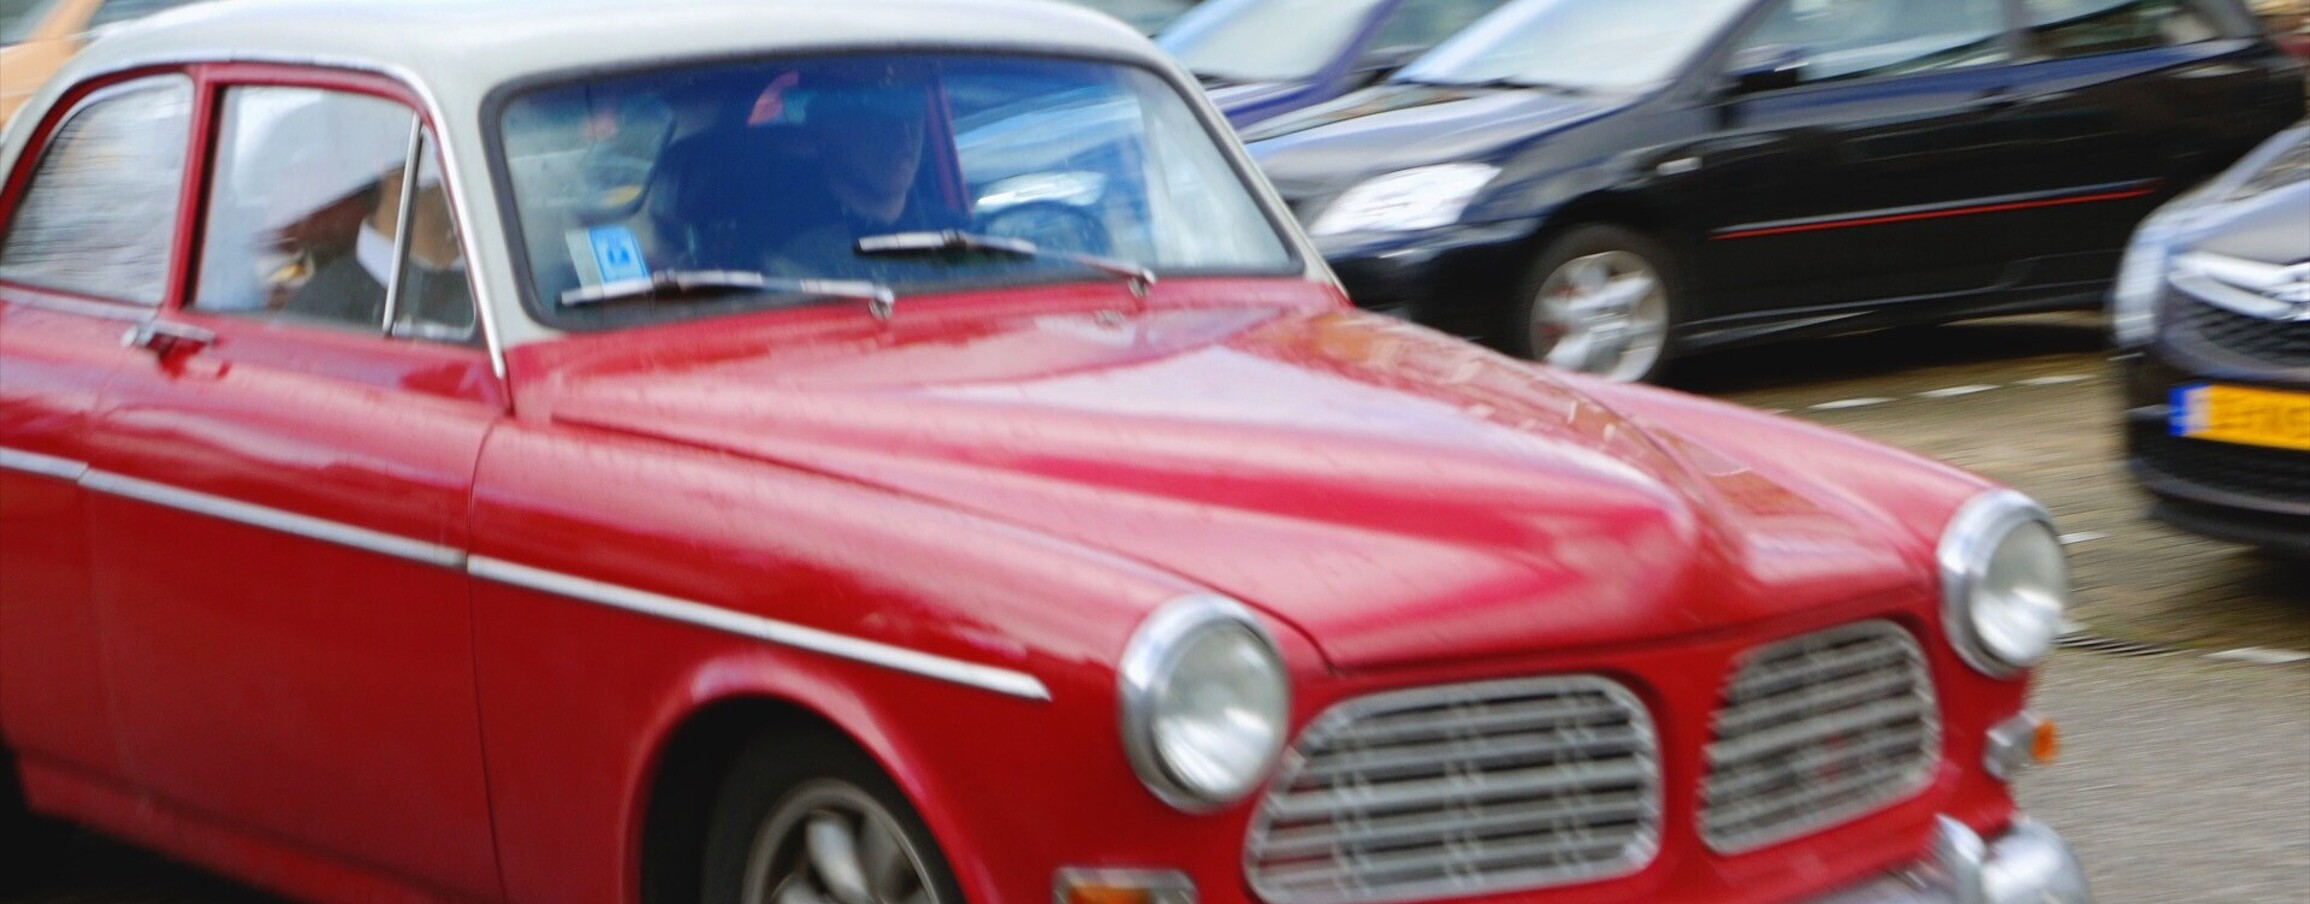 Blurry photo of a vintage car